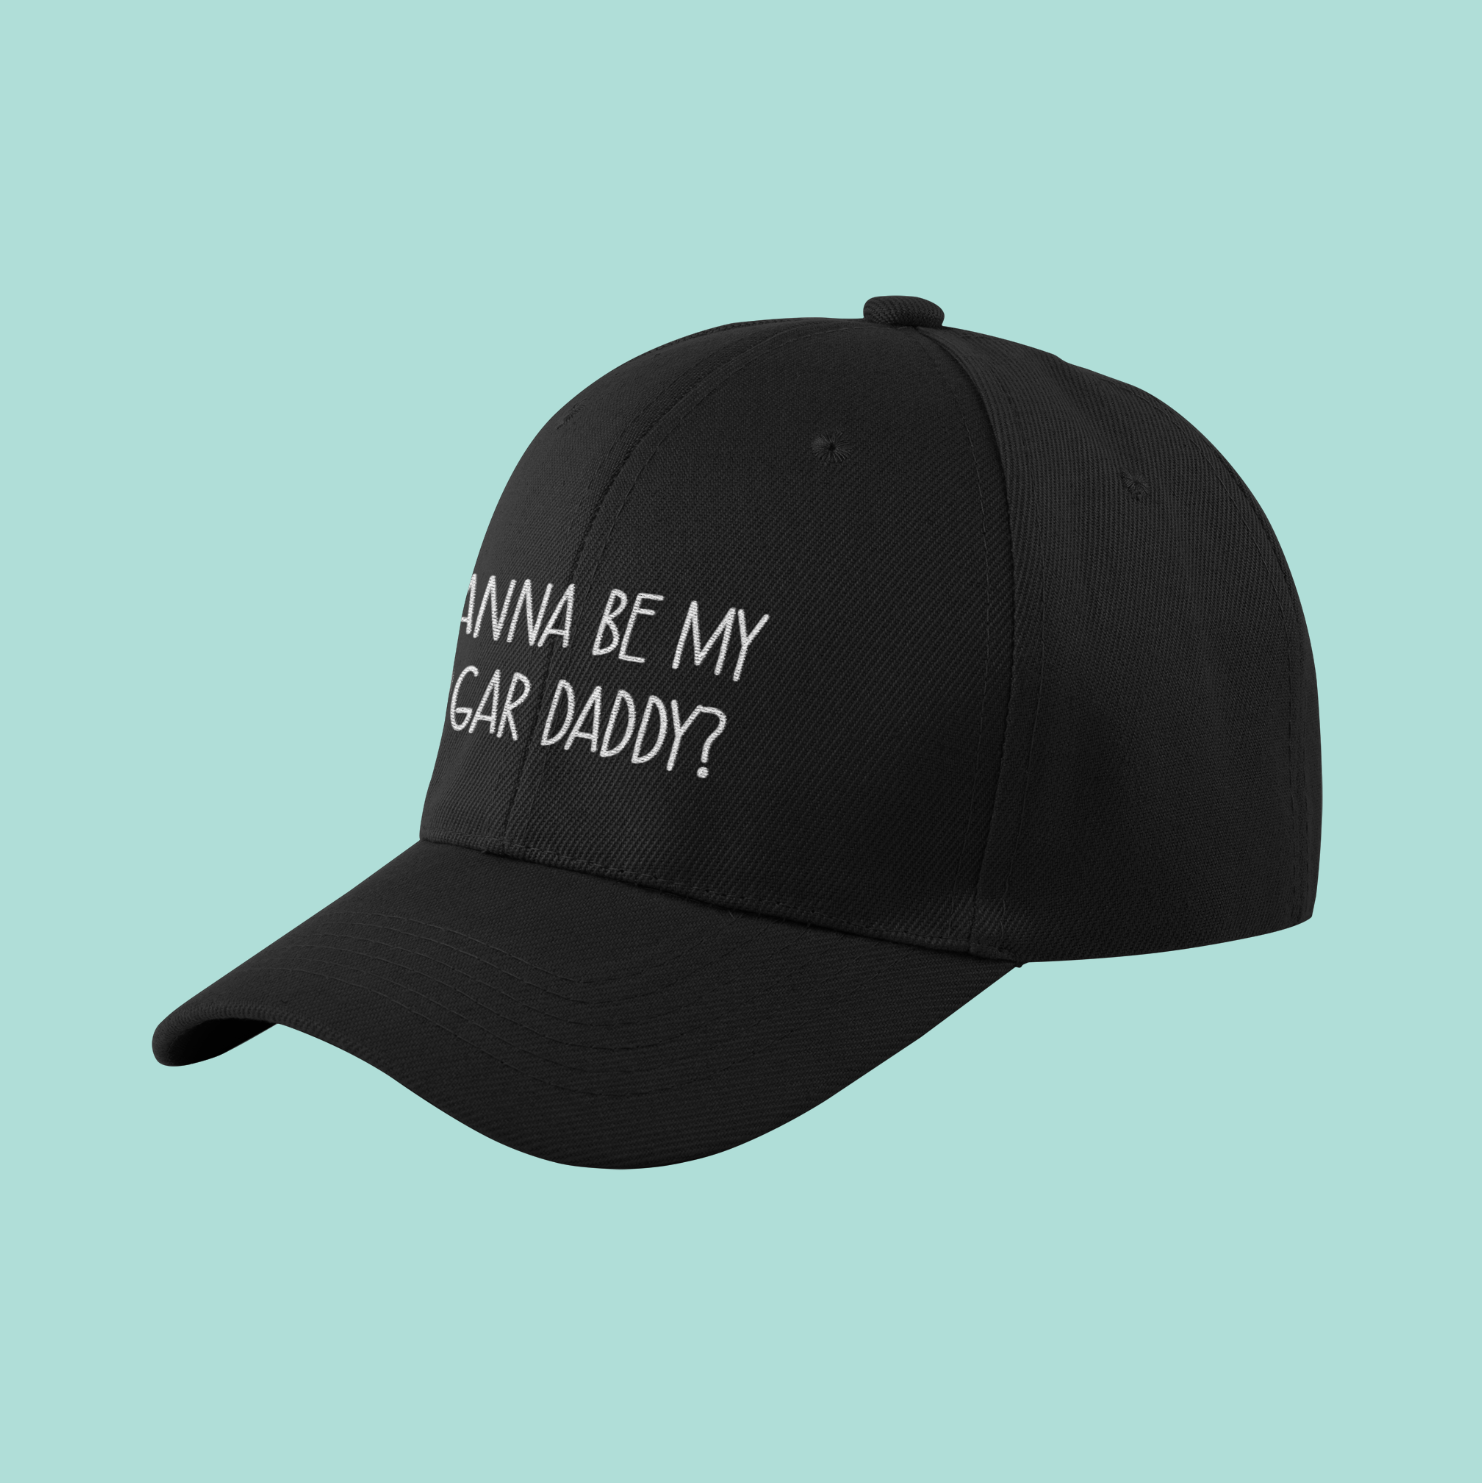 A black cotton cap with white lettering to the front which reads 'wanna be my sugar daddy?'.